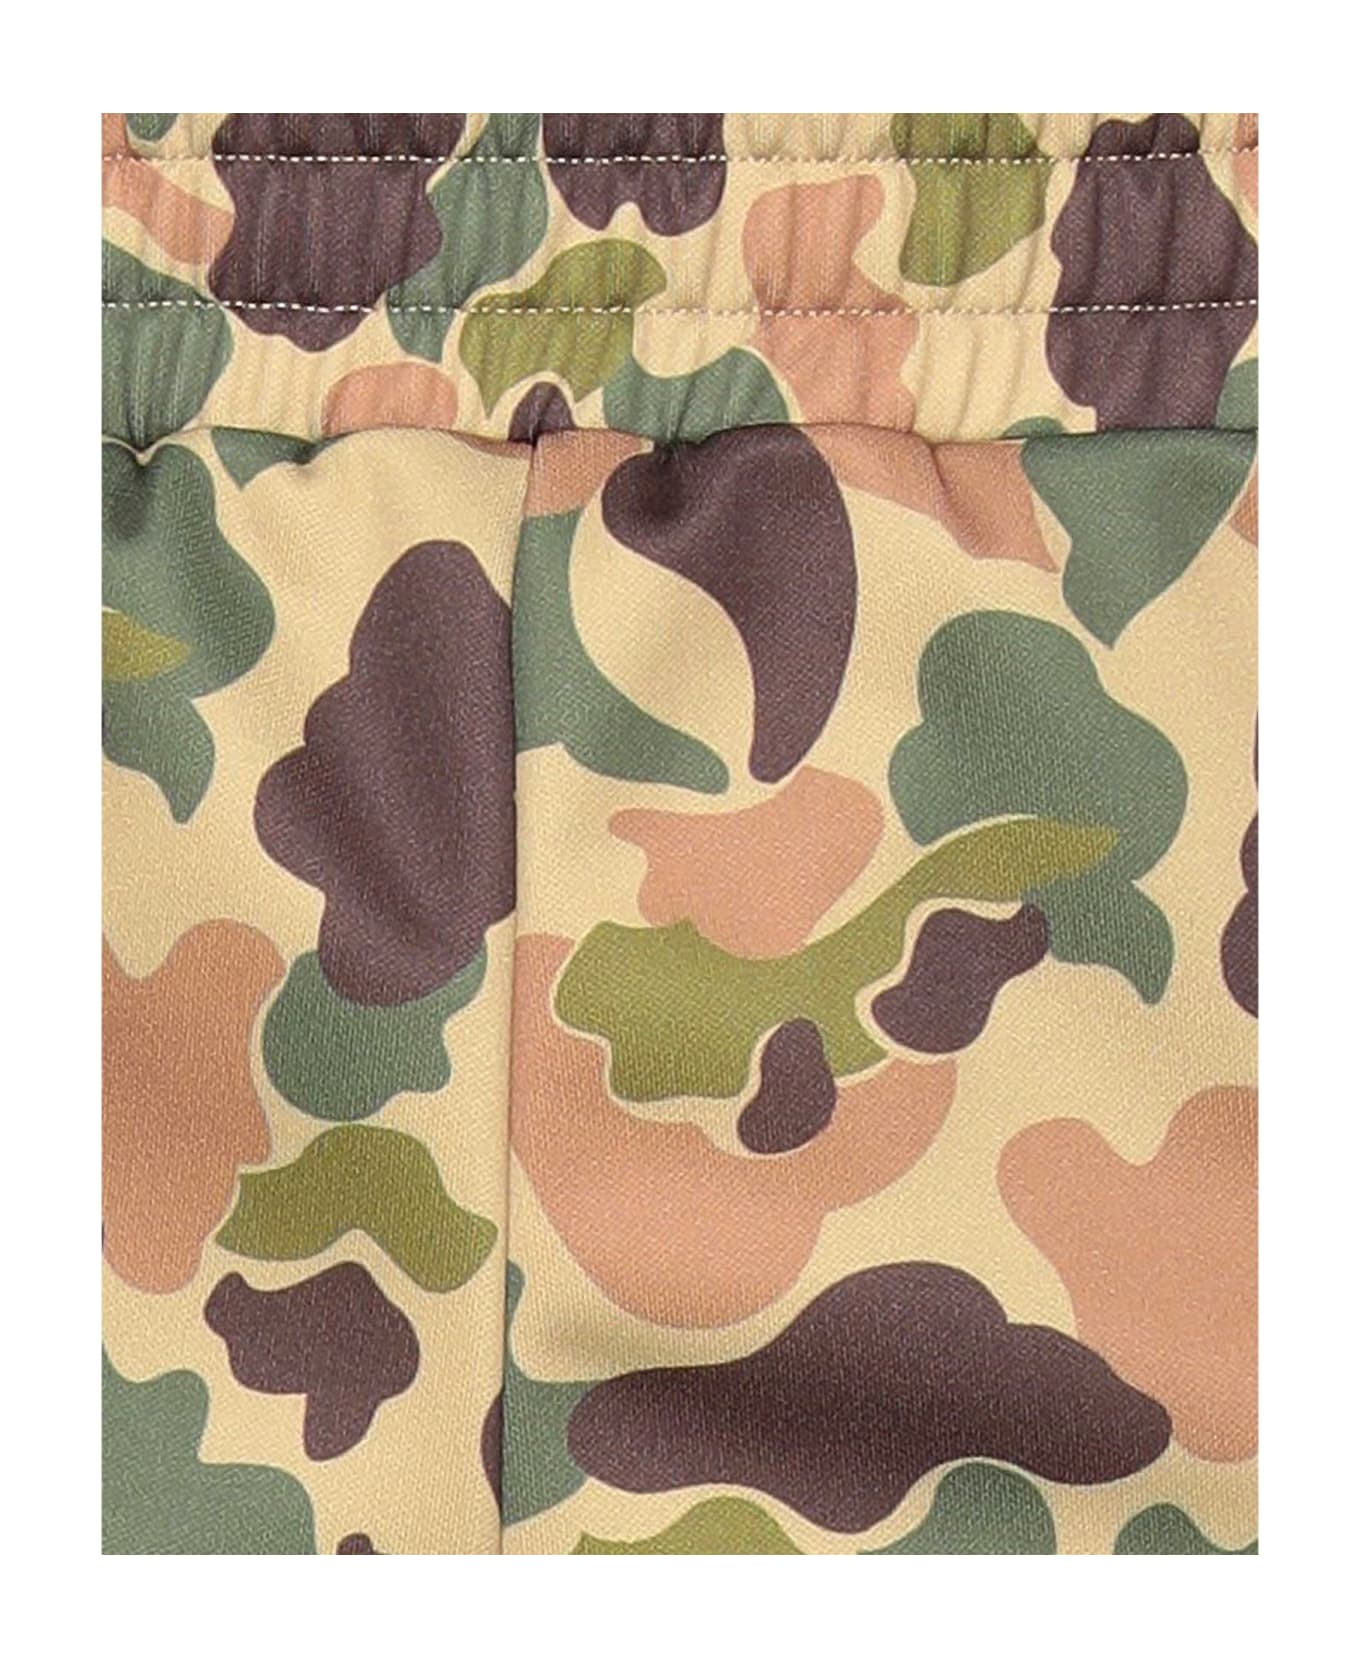 Palm Angels Camouflage Sweatpants - Brown